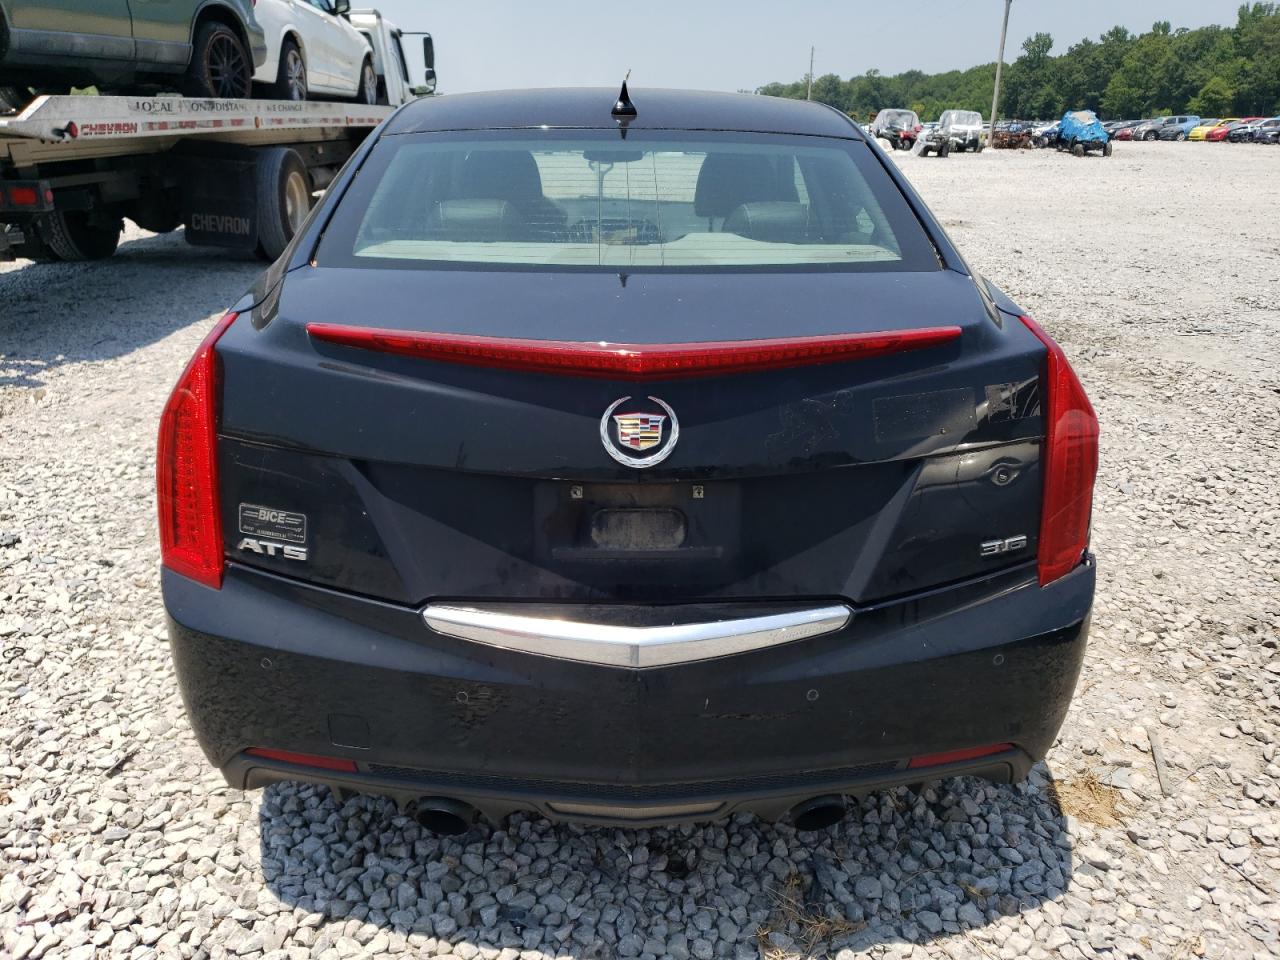 1G6AE5S34E0****** Salvage and Repairable 2014 Cadillac ATS in Alabama State